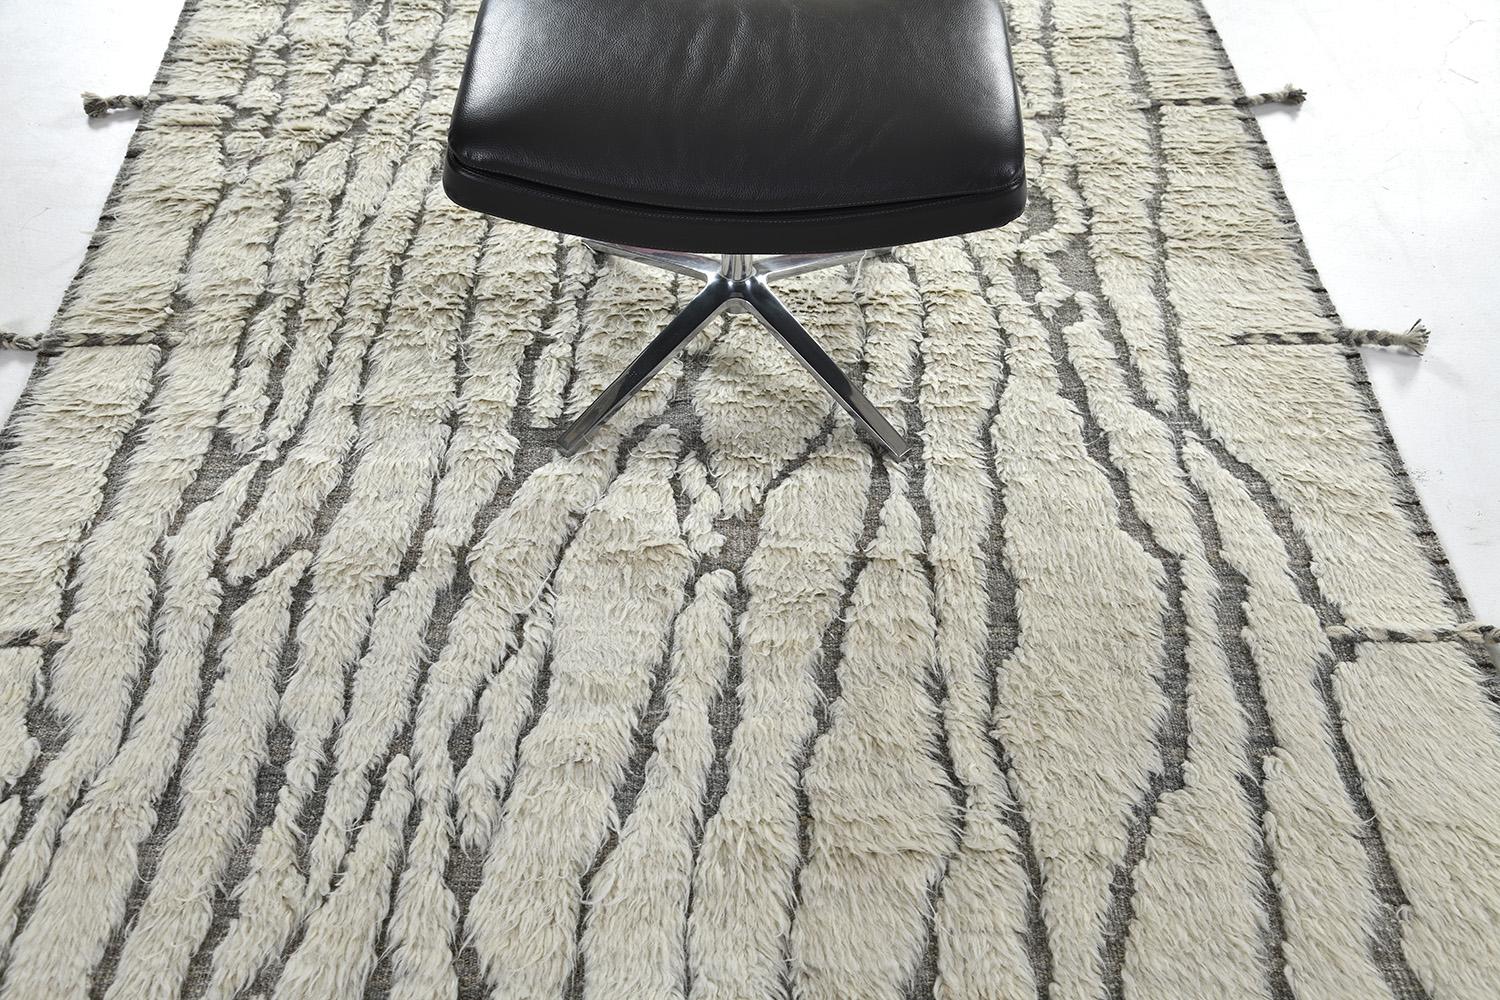 Through its simplicity, this magnificent rug will make your space more elegant with this textured heather gray Moringa design rug from our Atlas Collection. Fish-tailed borders with mesmerizing ash toned top and bottom edges in a cream field make